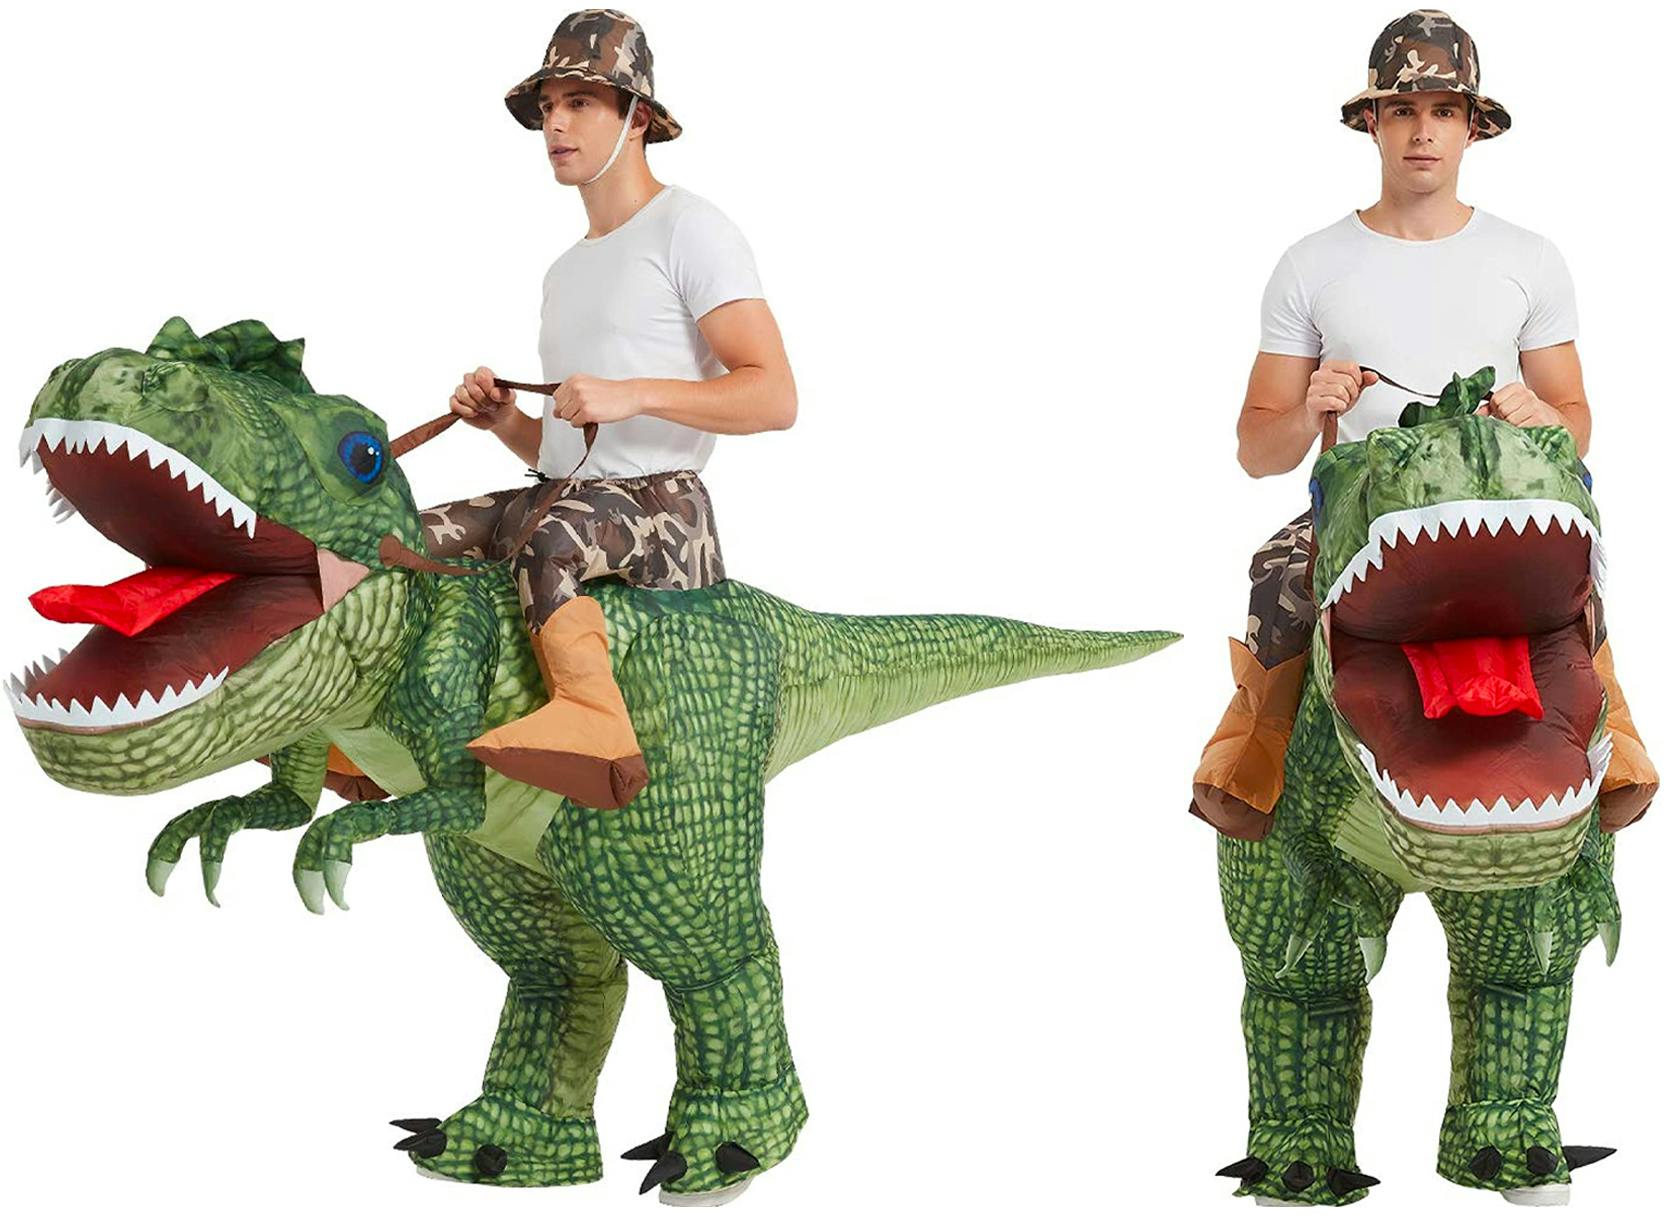 A man wearing an inflatable ride-on dinosaur